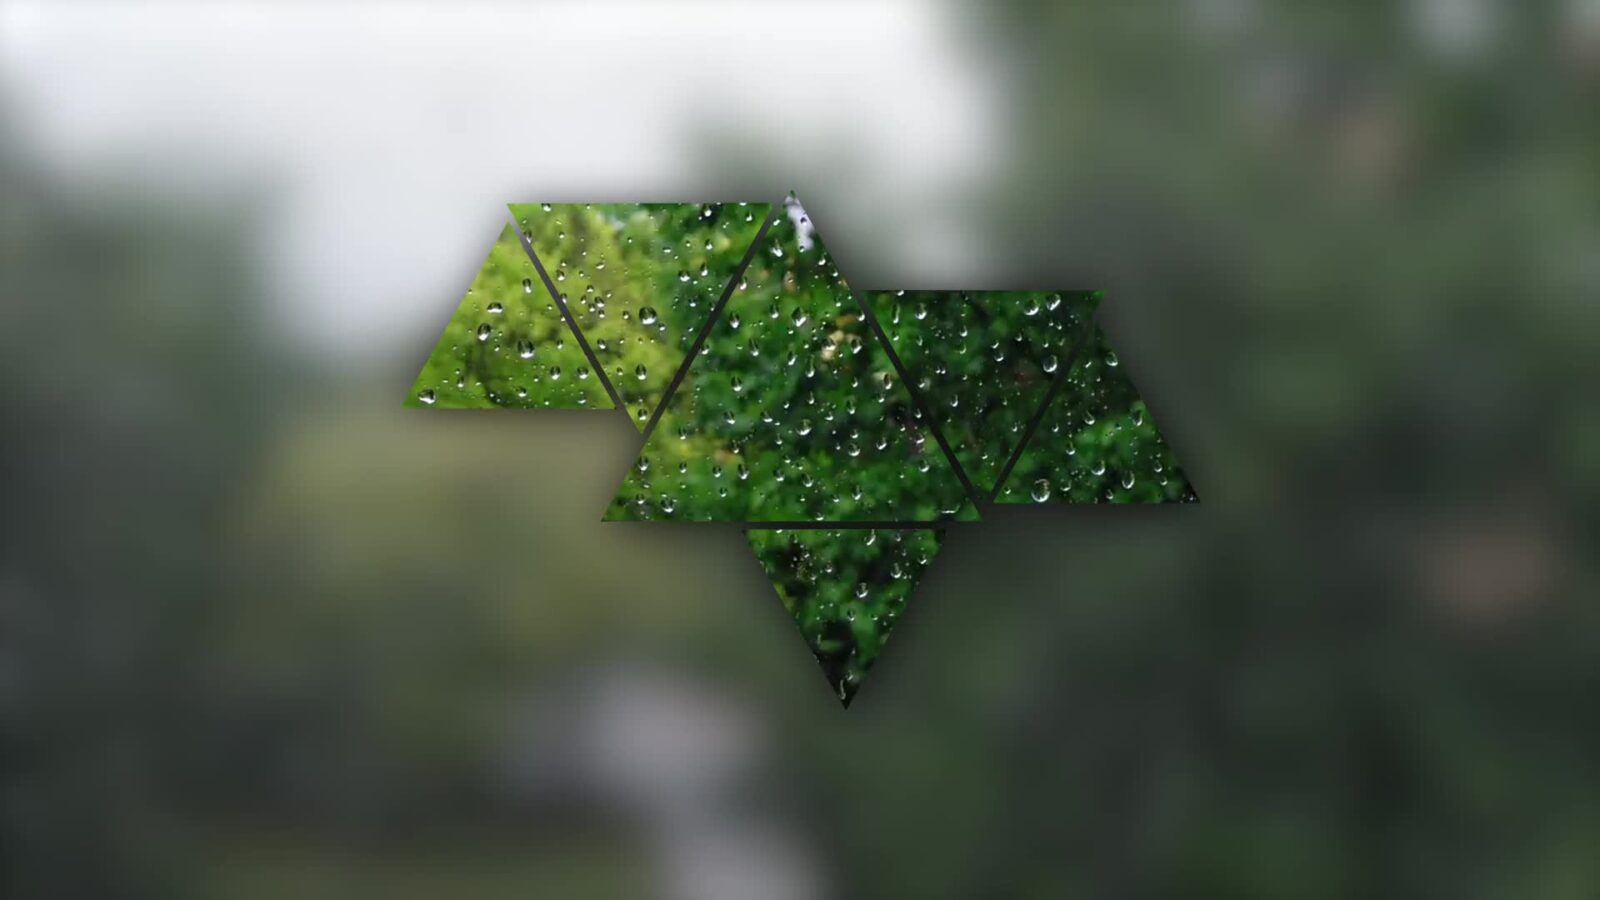 LiveWallpapers4Free.com | Triangle Rain - Weather - Nature - Free Live Wallpaper